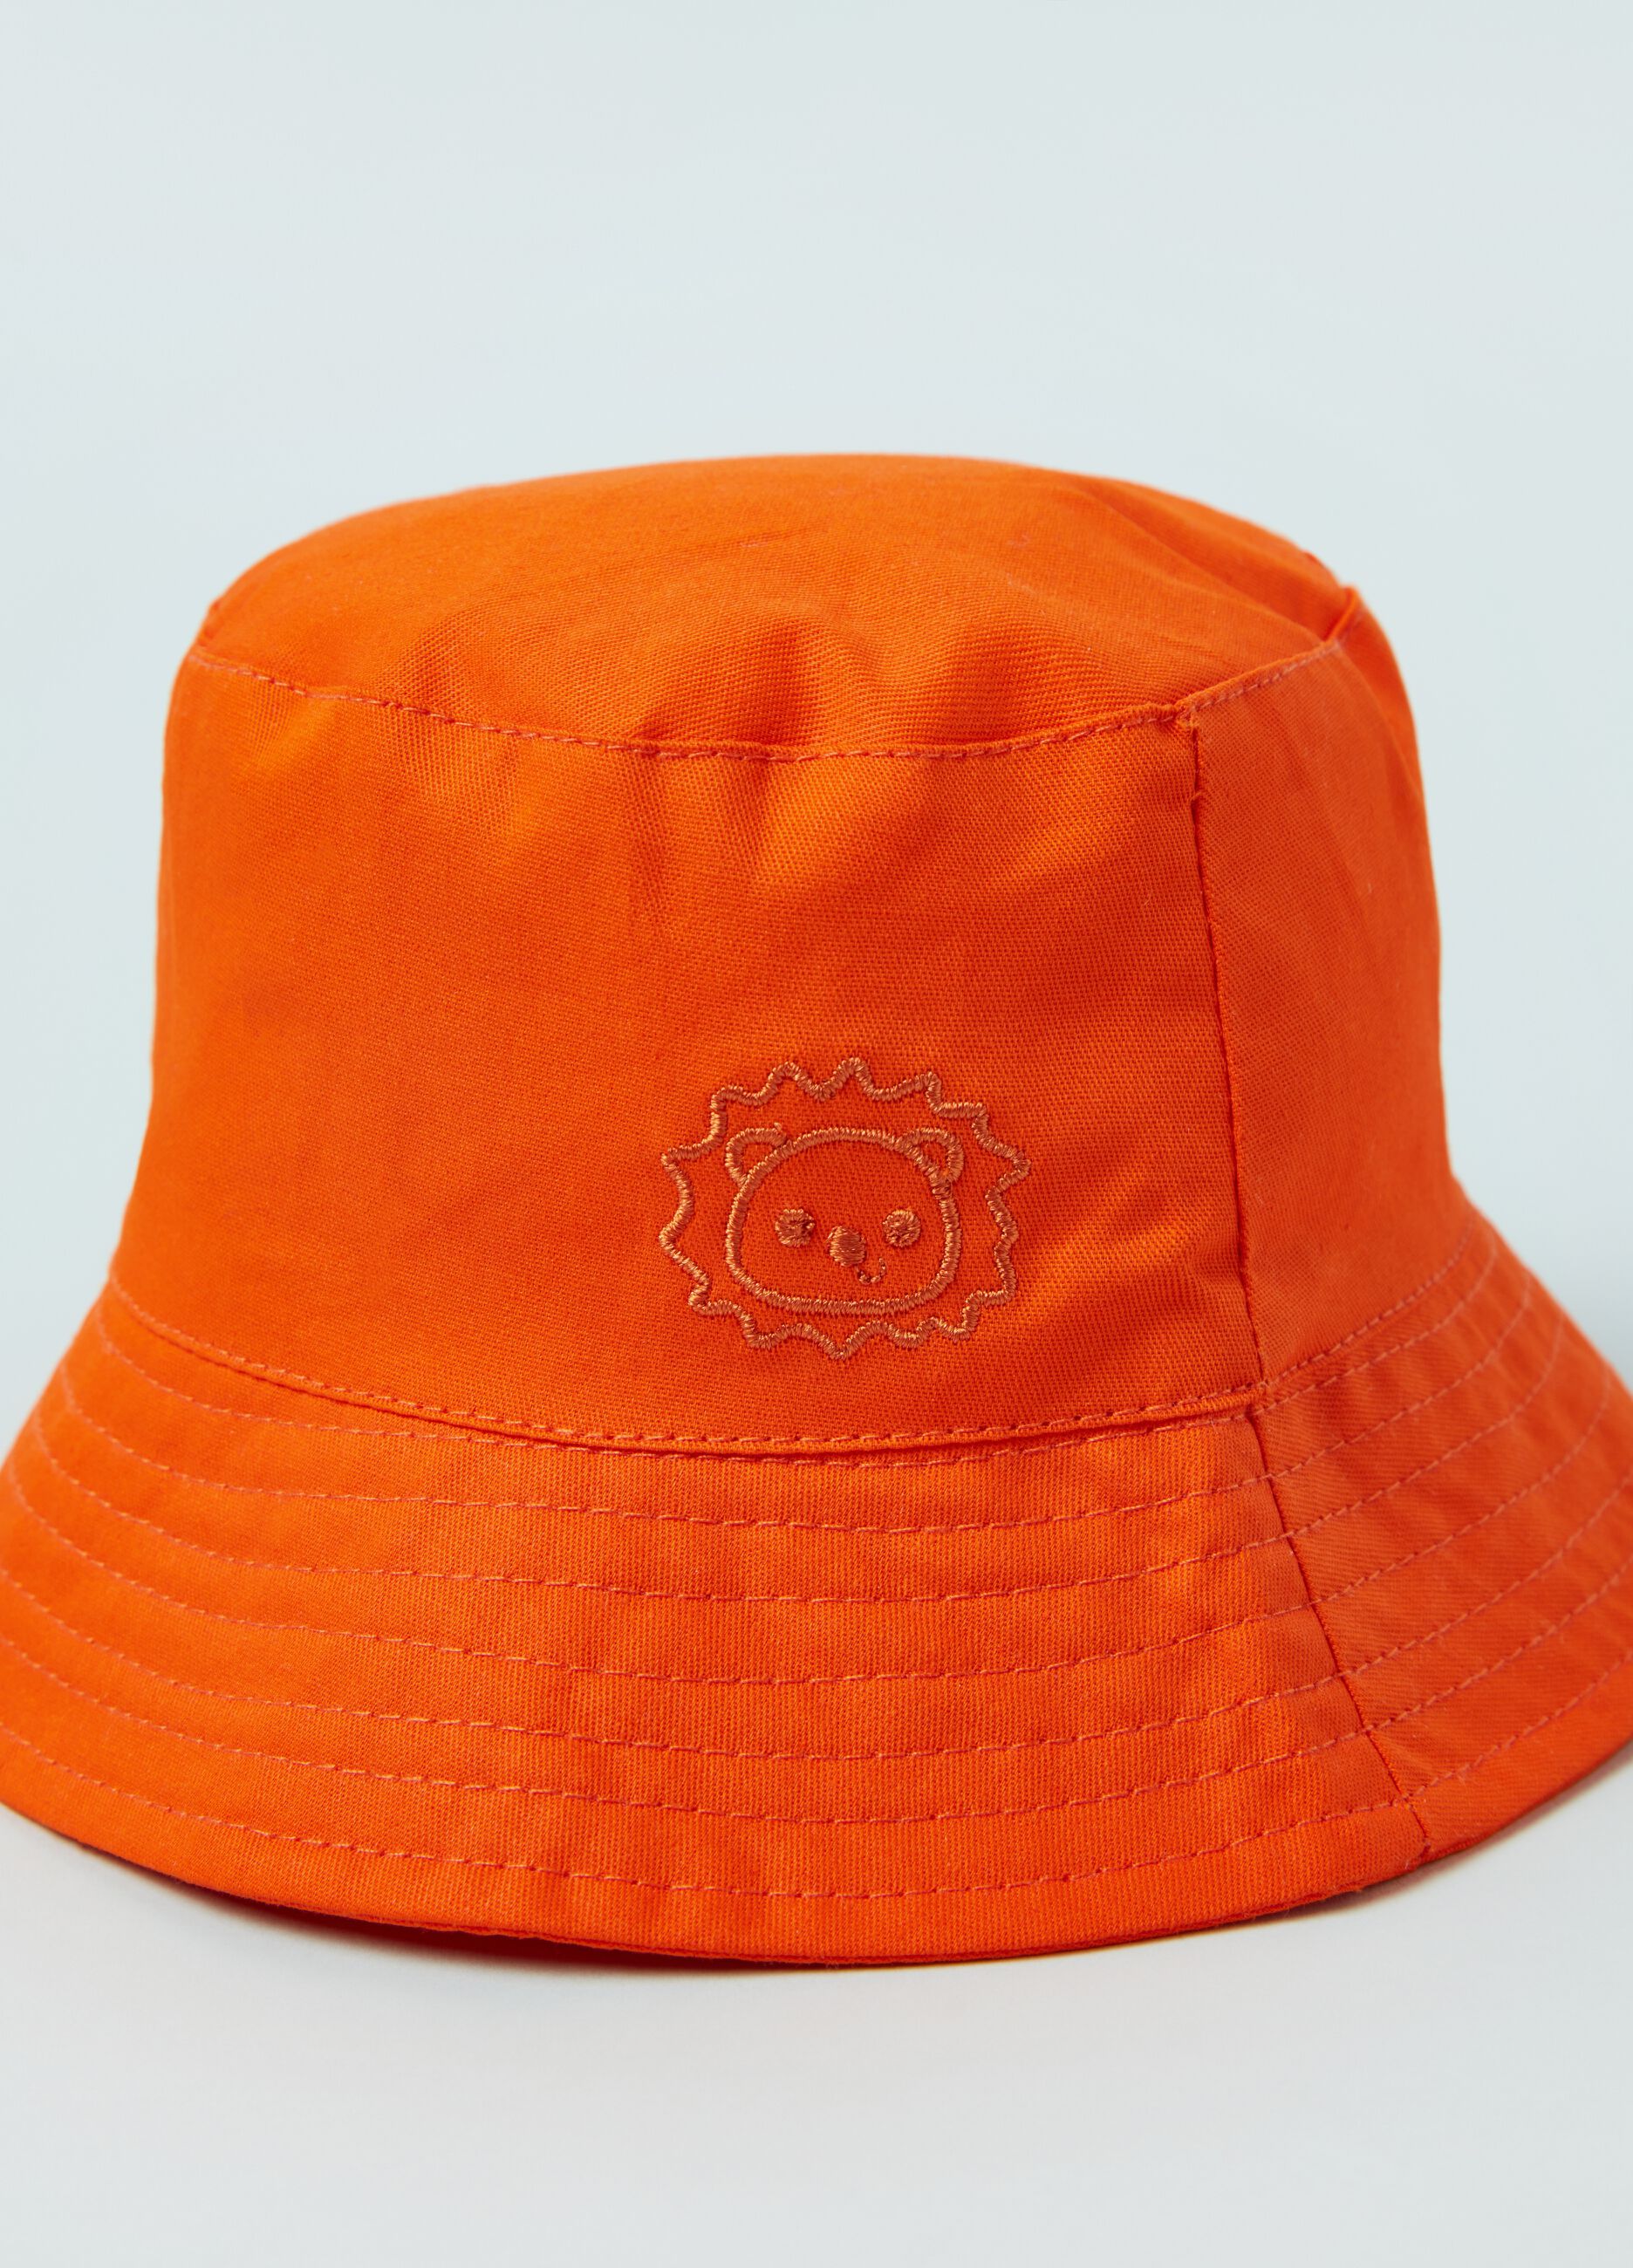 Fishing hat with lion embroidery